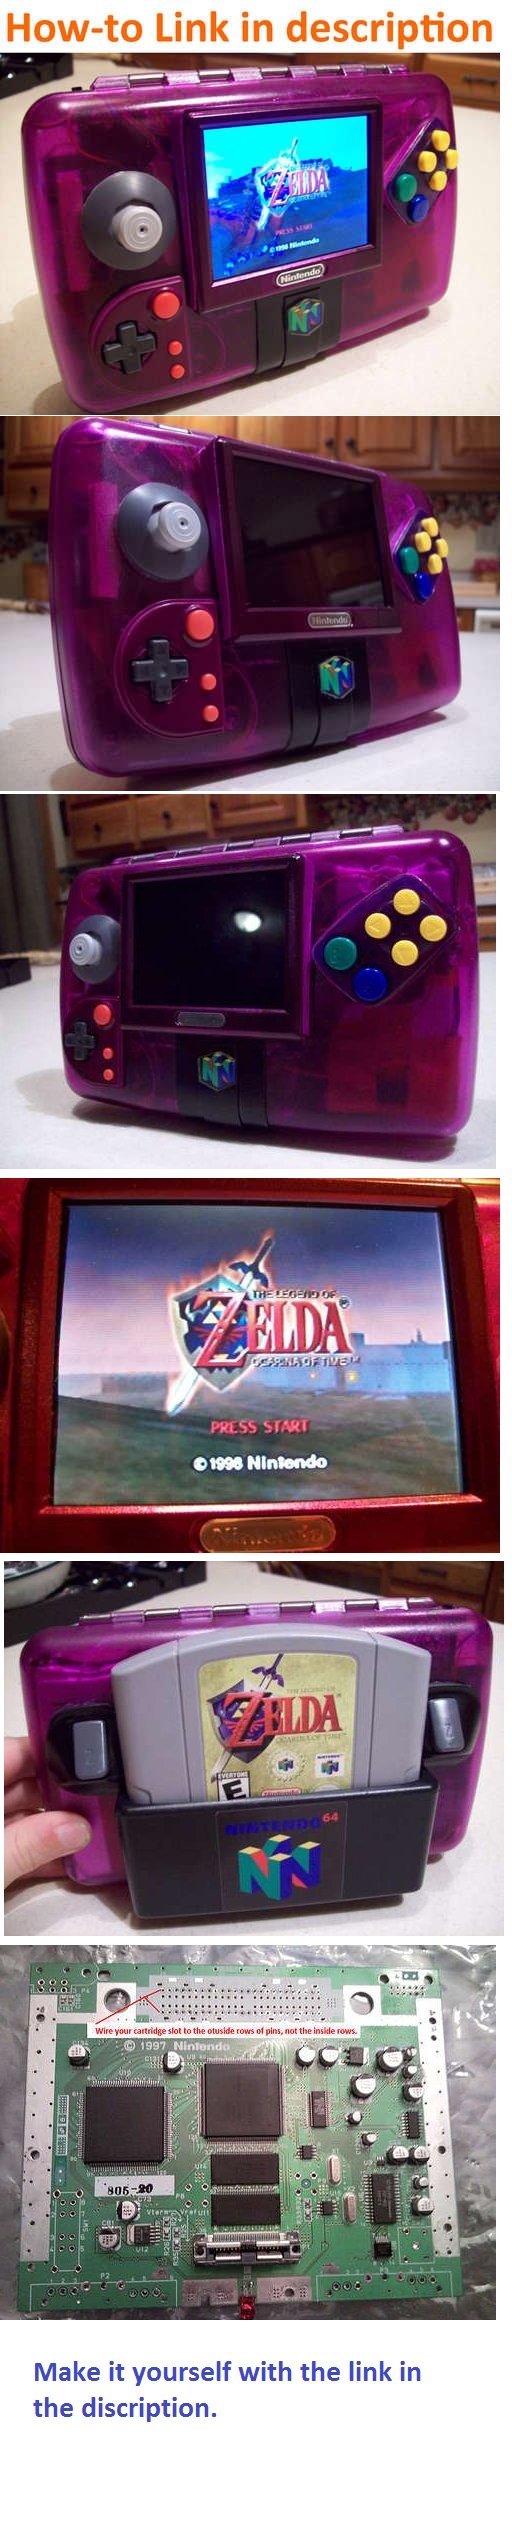 Handheld N64. all credit to Zachariah Perry. Link in description uis" i'" vitsi I Make it yourself with the link fr. This makes me sad..because I know I don't have the skill or know-how to make this properly. :(